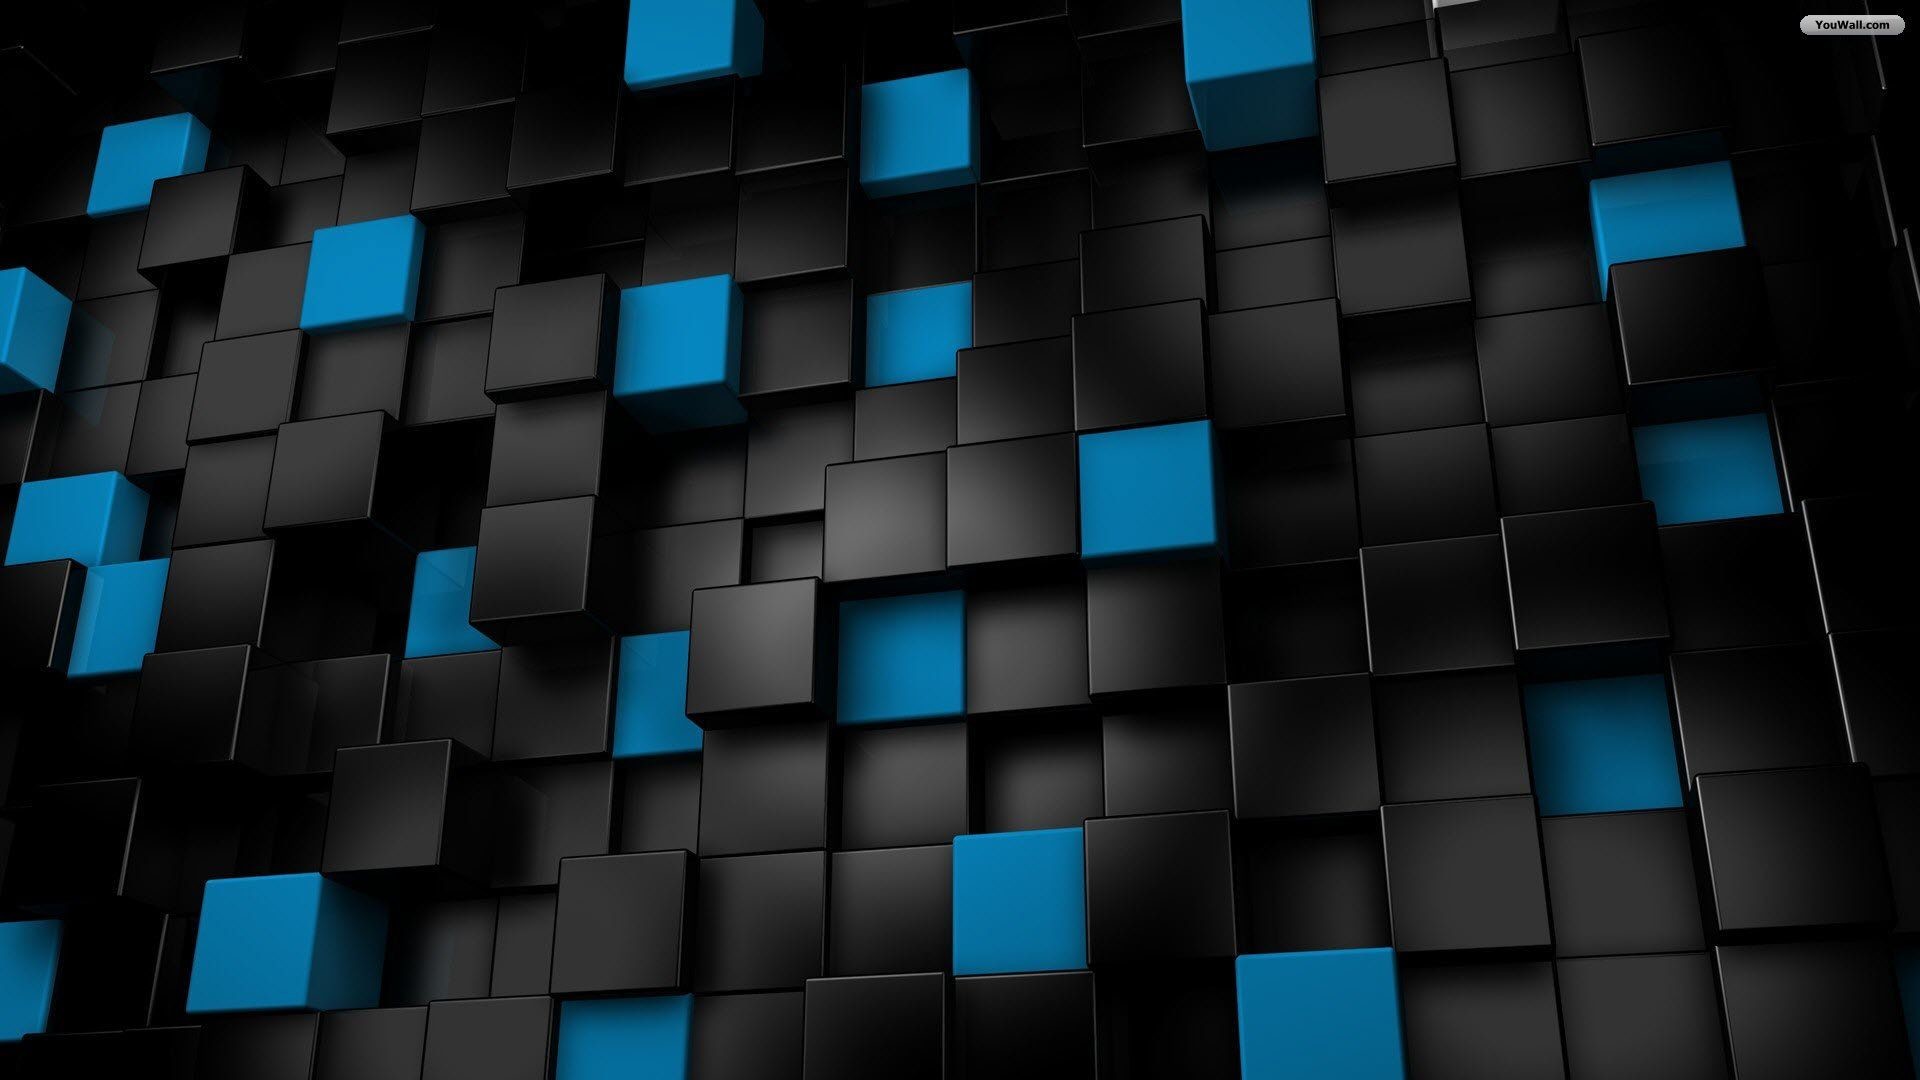 1920x1080 Black and Blue HD Desktop Background Wallpapers 2240 - HD .